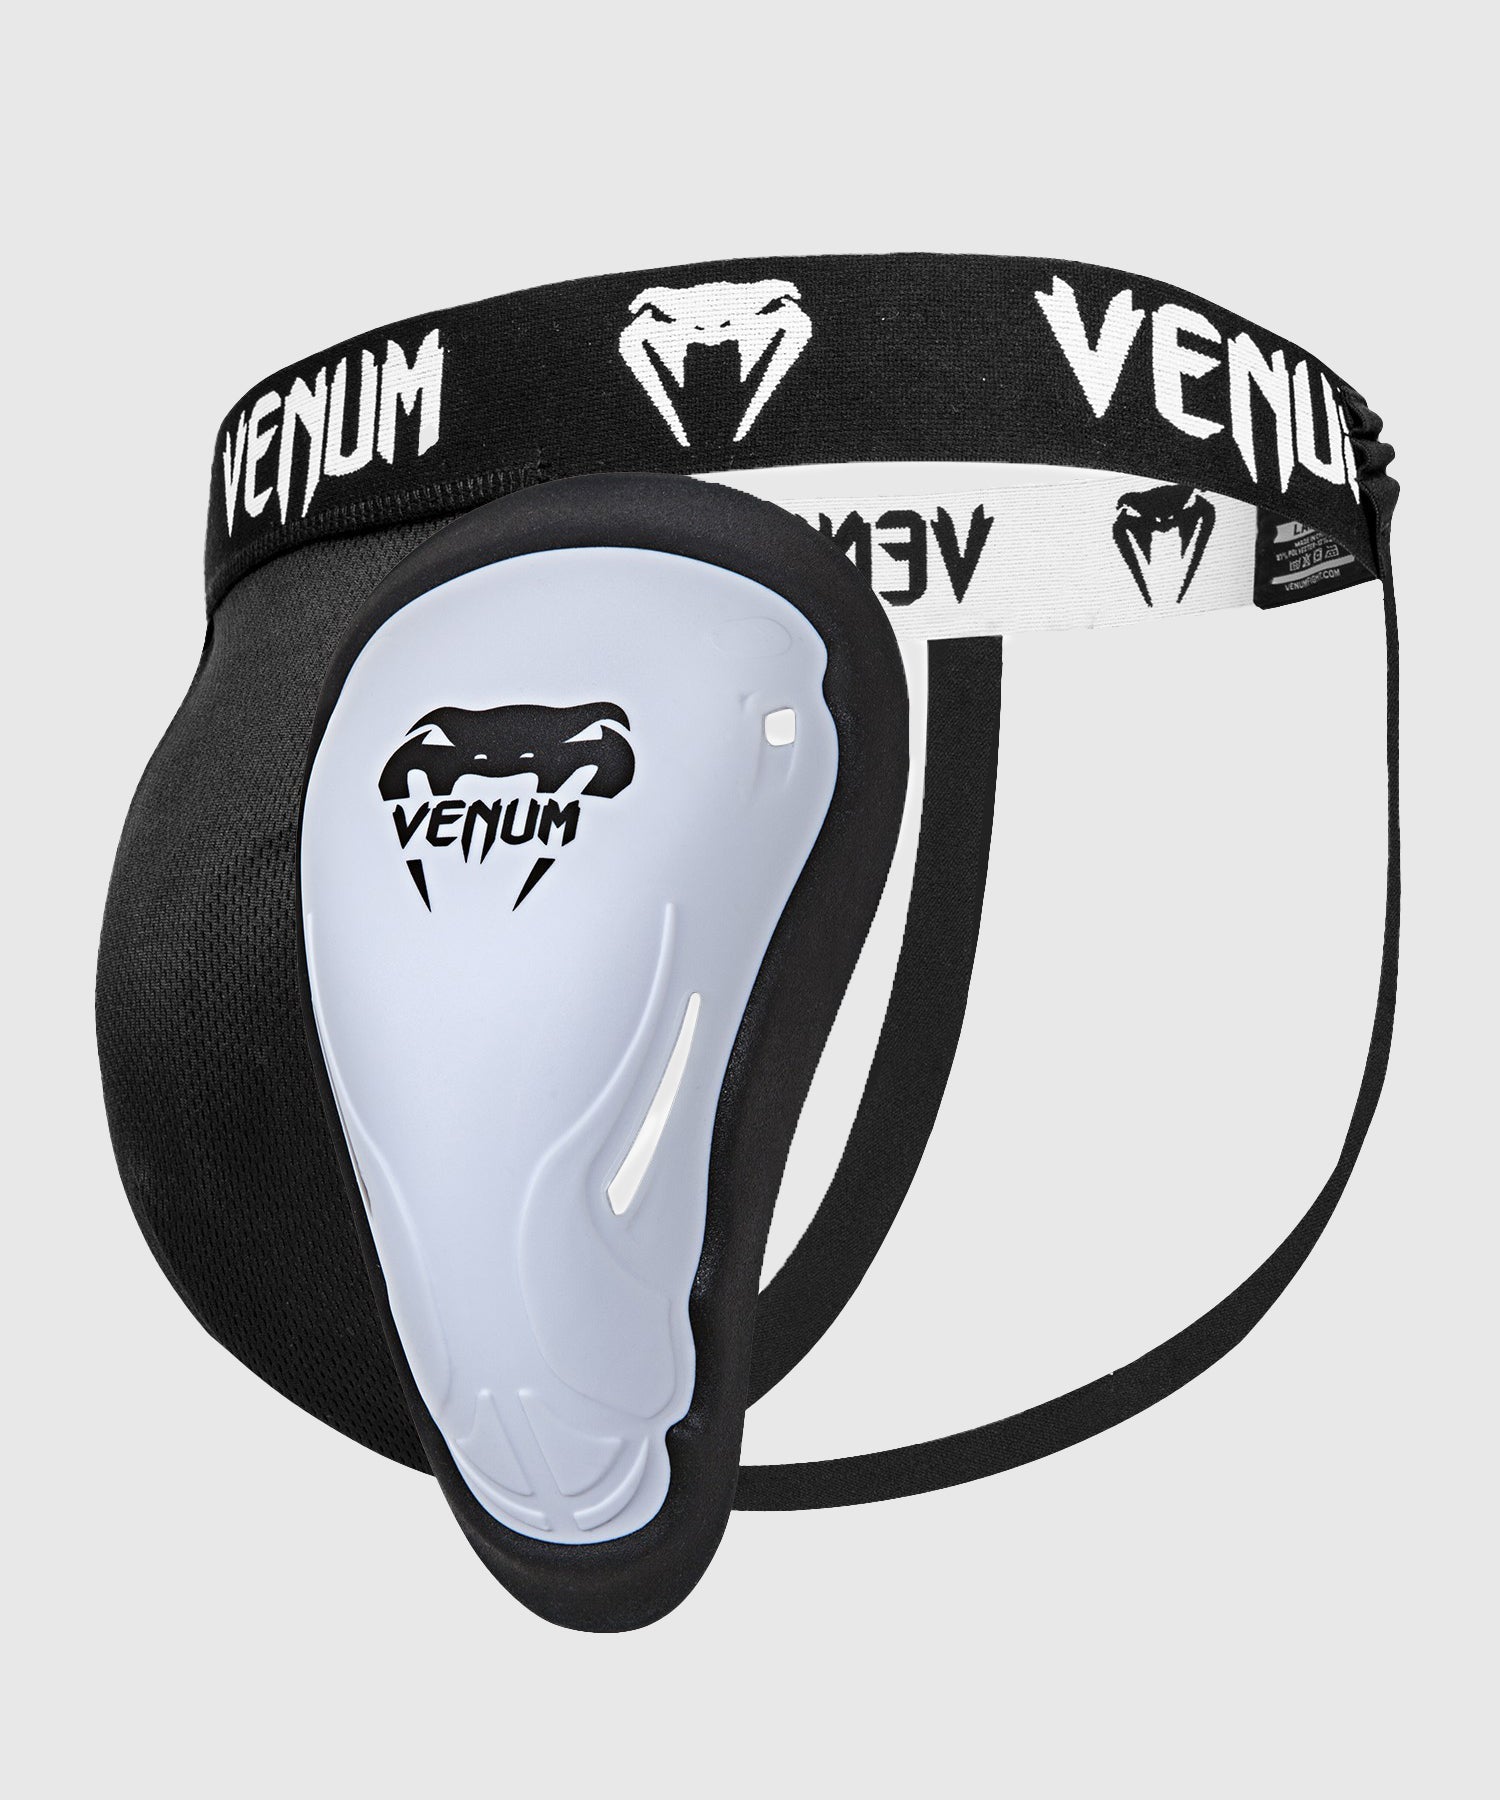 Venum Challenger Groin Guard and Support - Large - Black/White